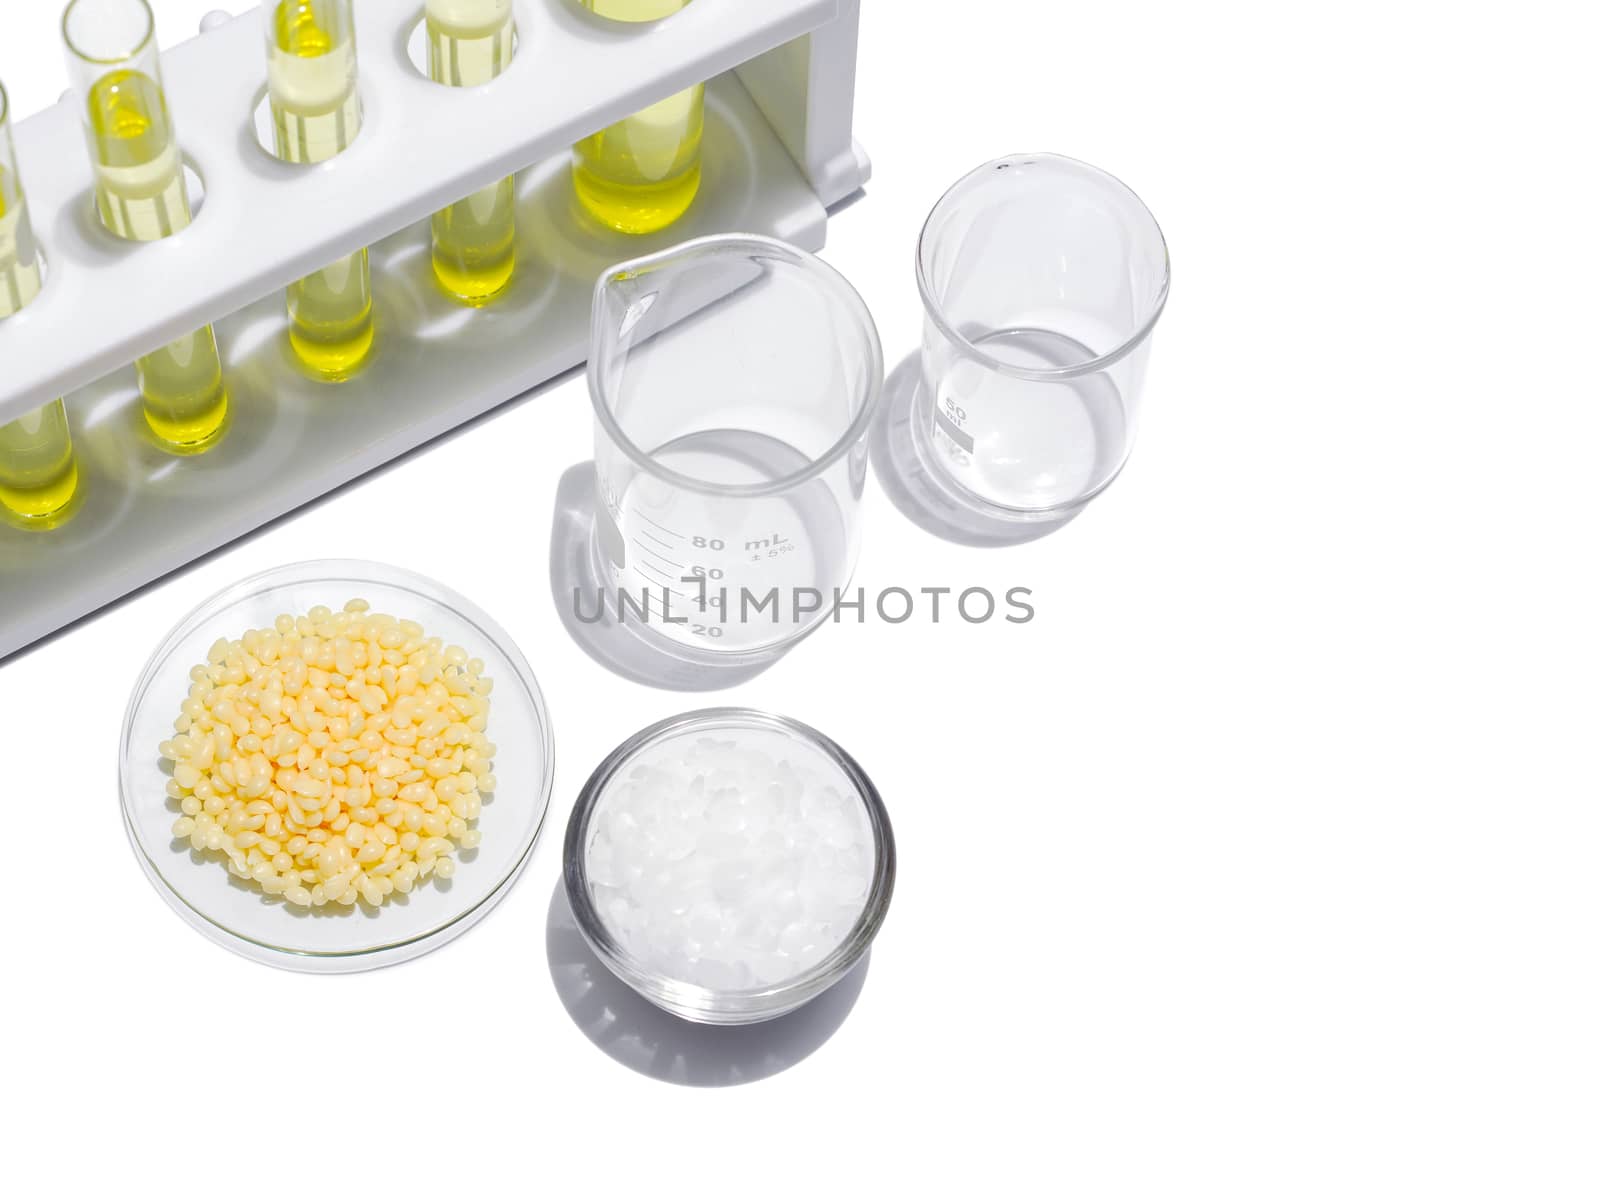 Cosmetic chemicals ingredient on white laboratory table. Candelilla Wax SP-75, Microcrystalline wax sp-623.